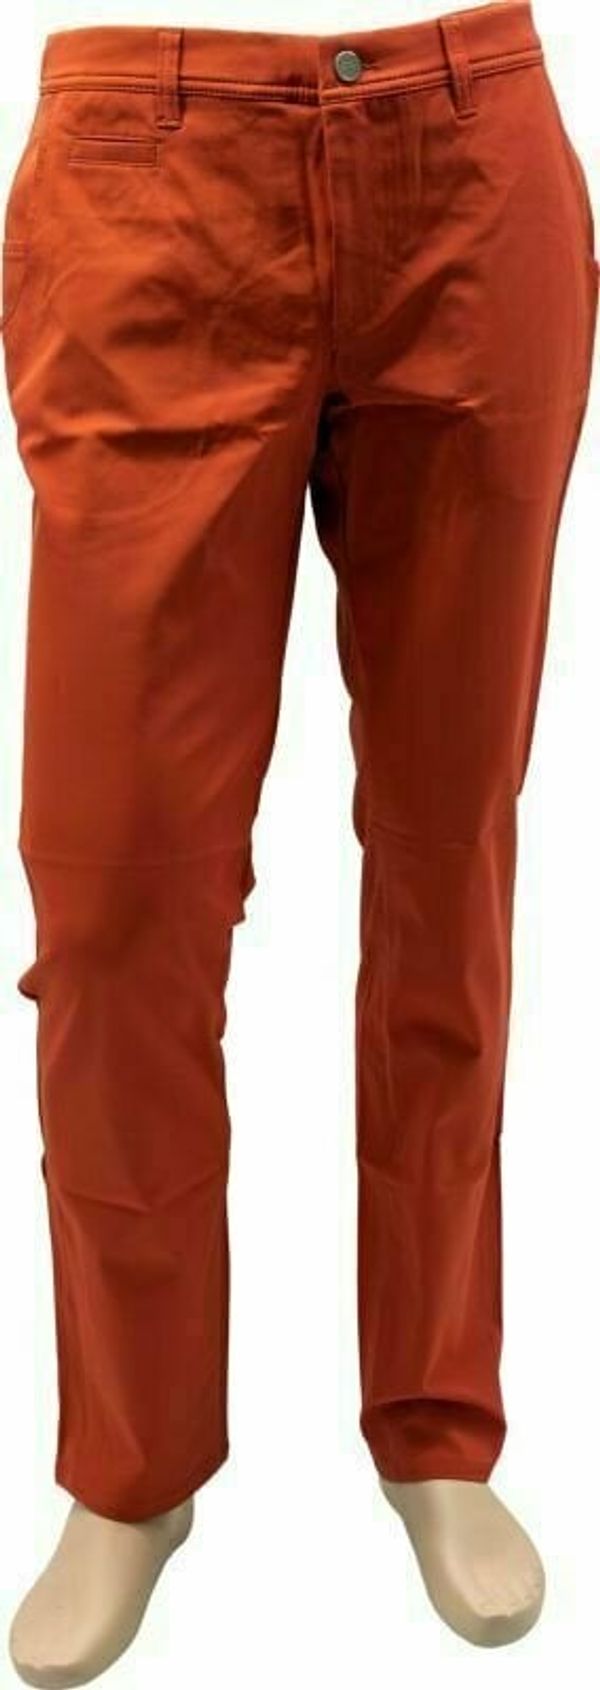 Alberto Alberto Rookie 3xDRY Cooler Mens Trousers Red 48